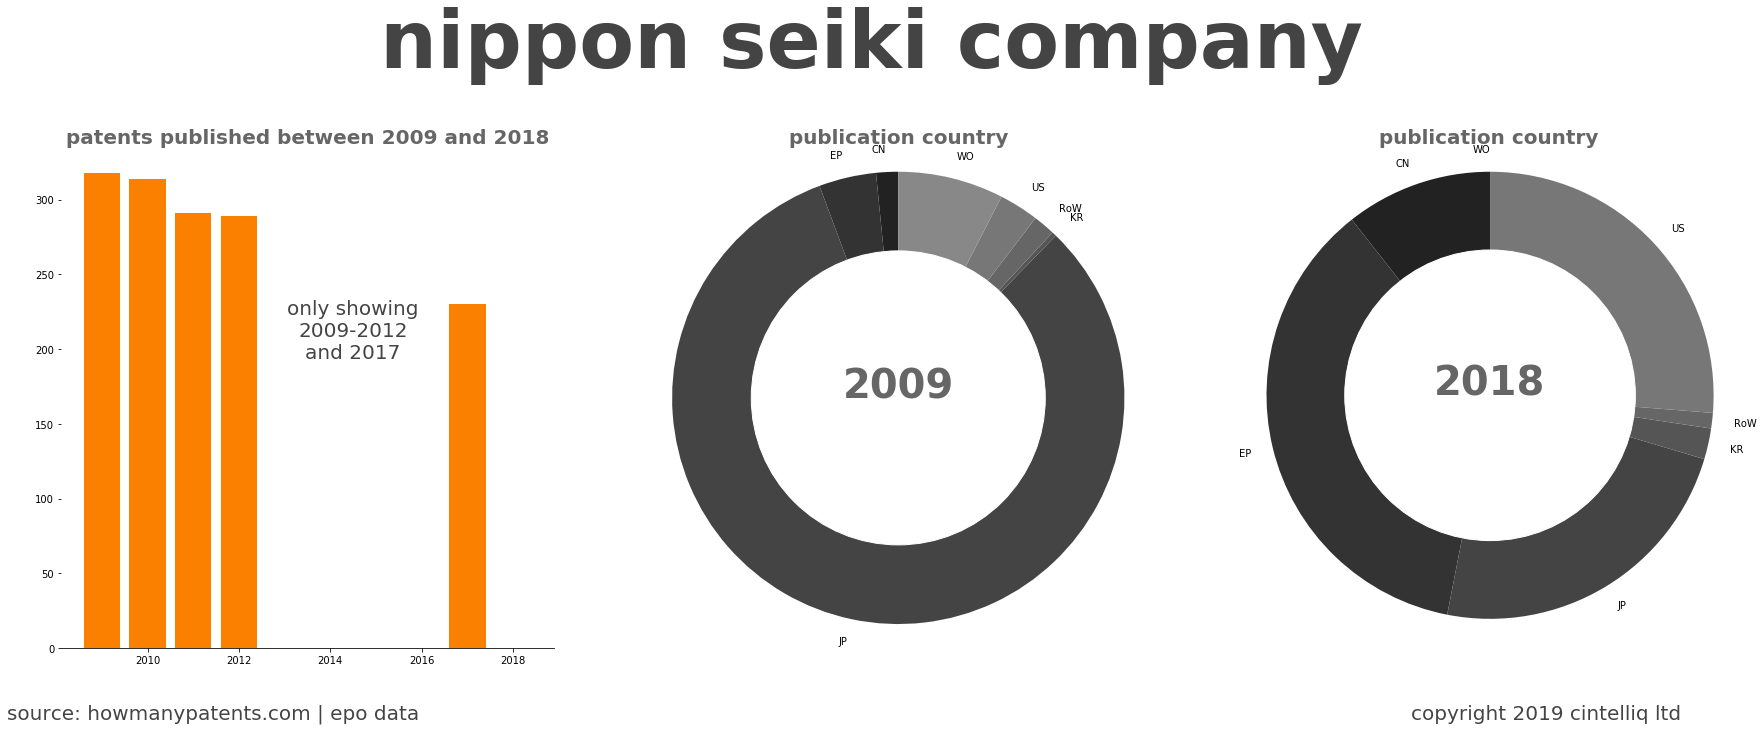 summary of patents for Nippon Seiki Company